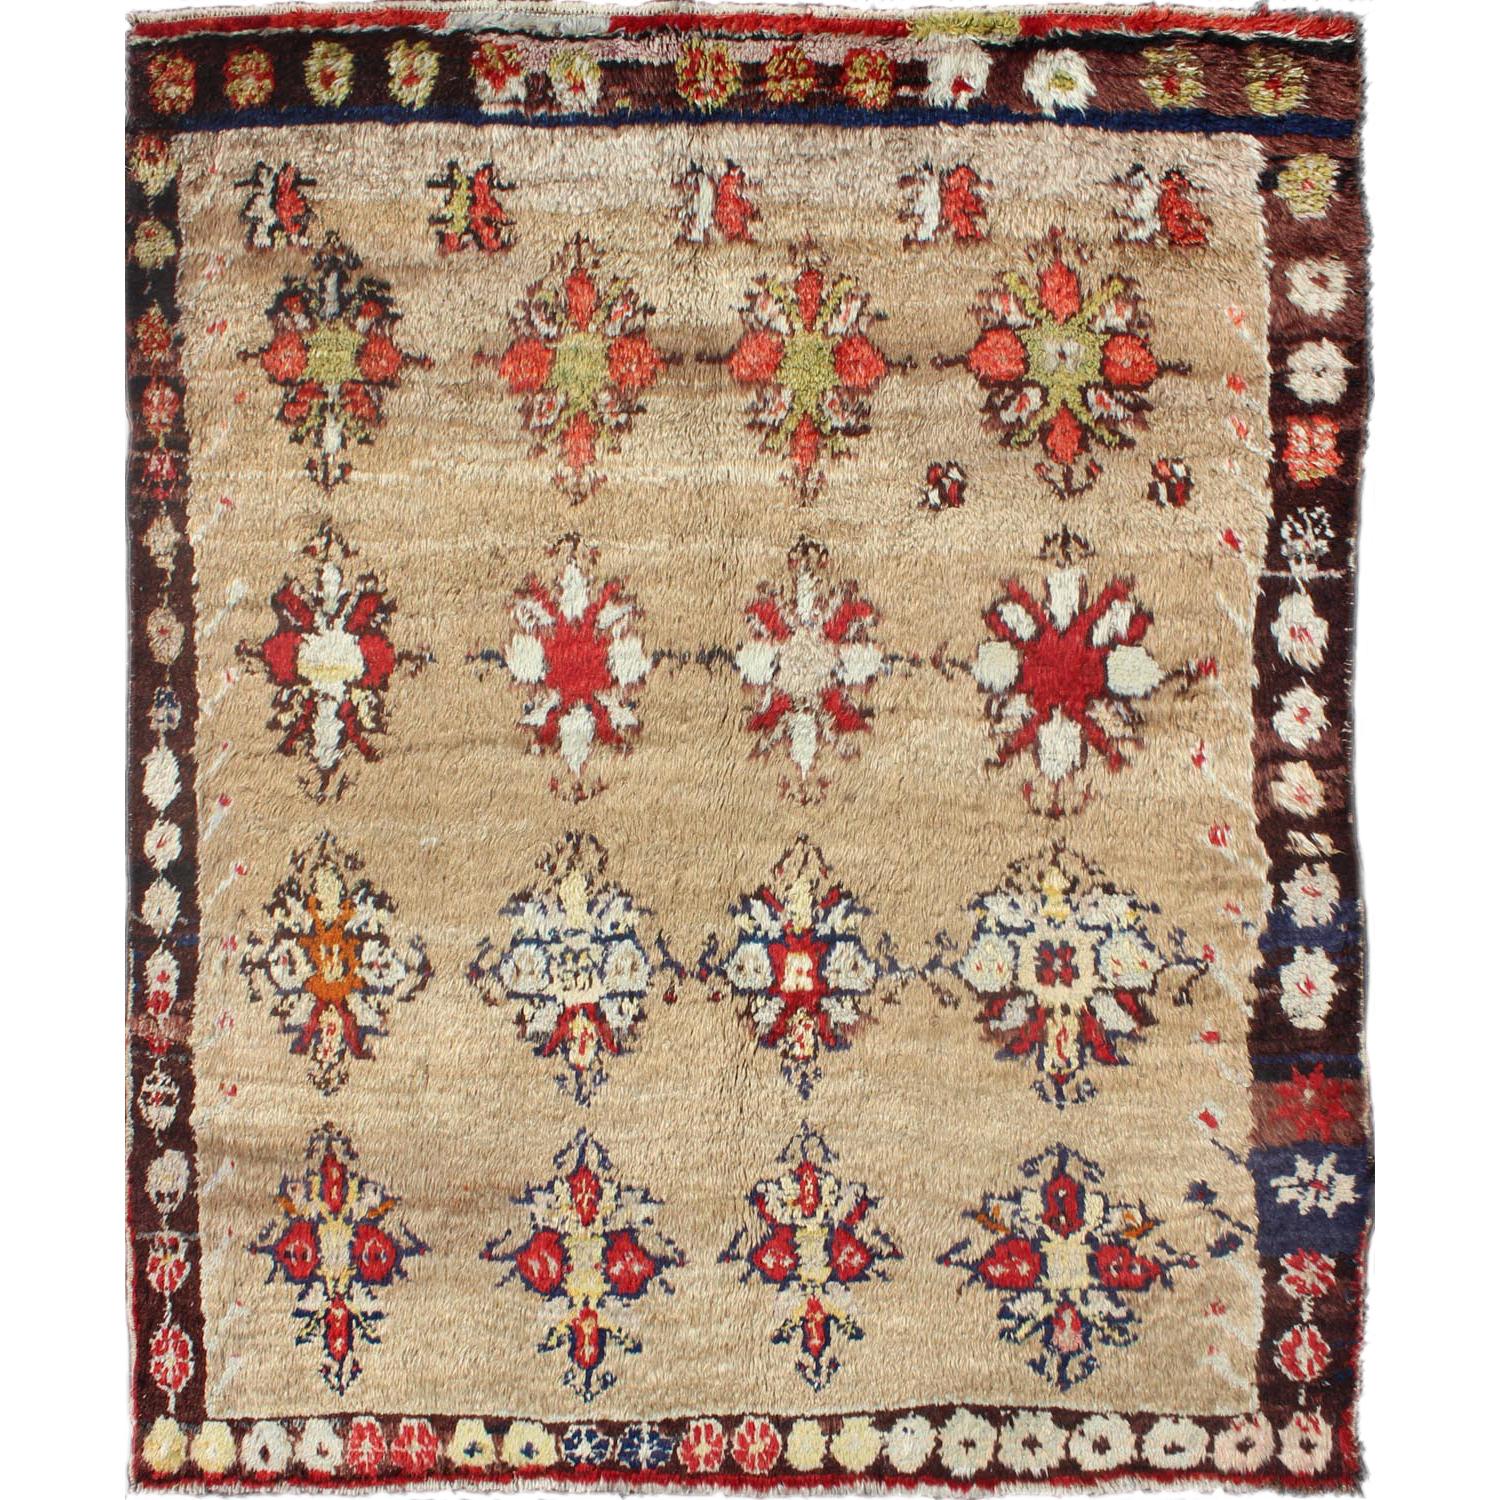 Angora Turkish Tulu Carpet with Colorful Floral Designs Set on Sand Field For Sale